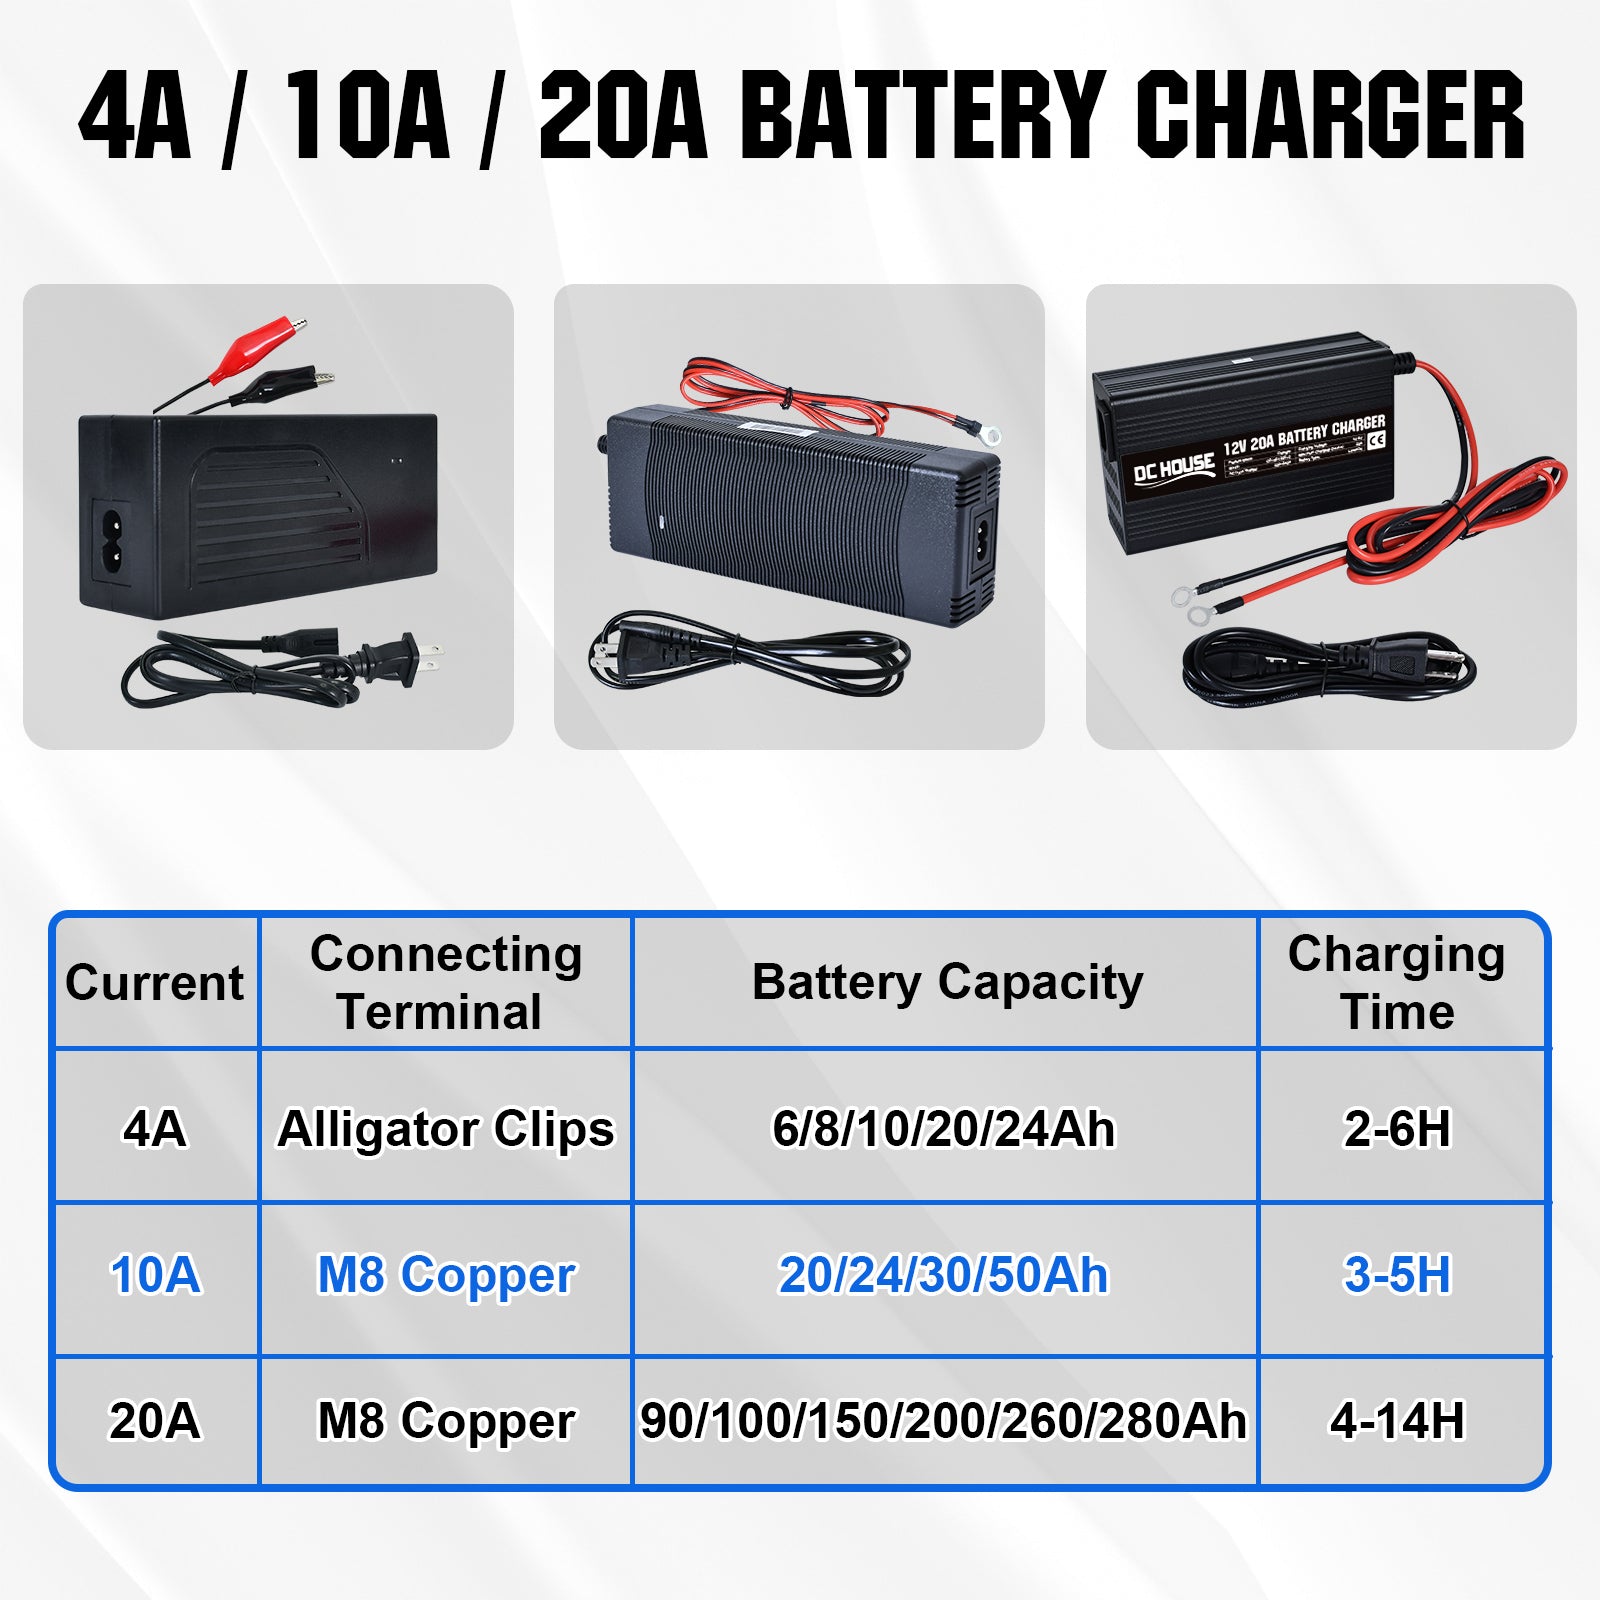 dchouse_12V_10A_LiFePO4_portable_battery_charger_2